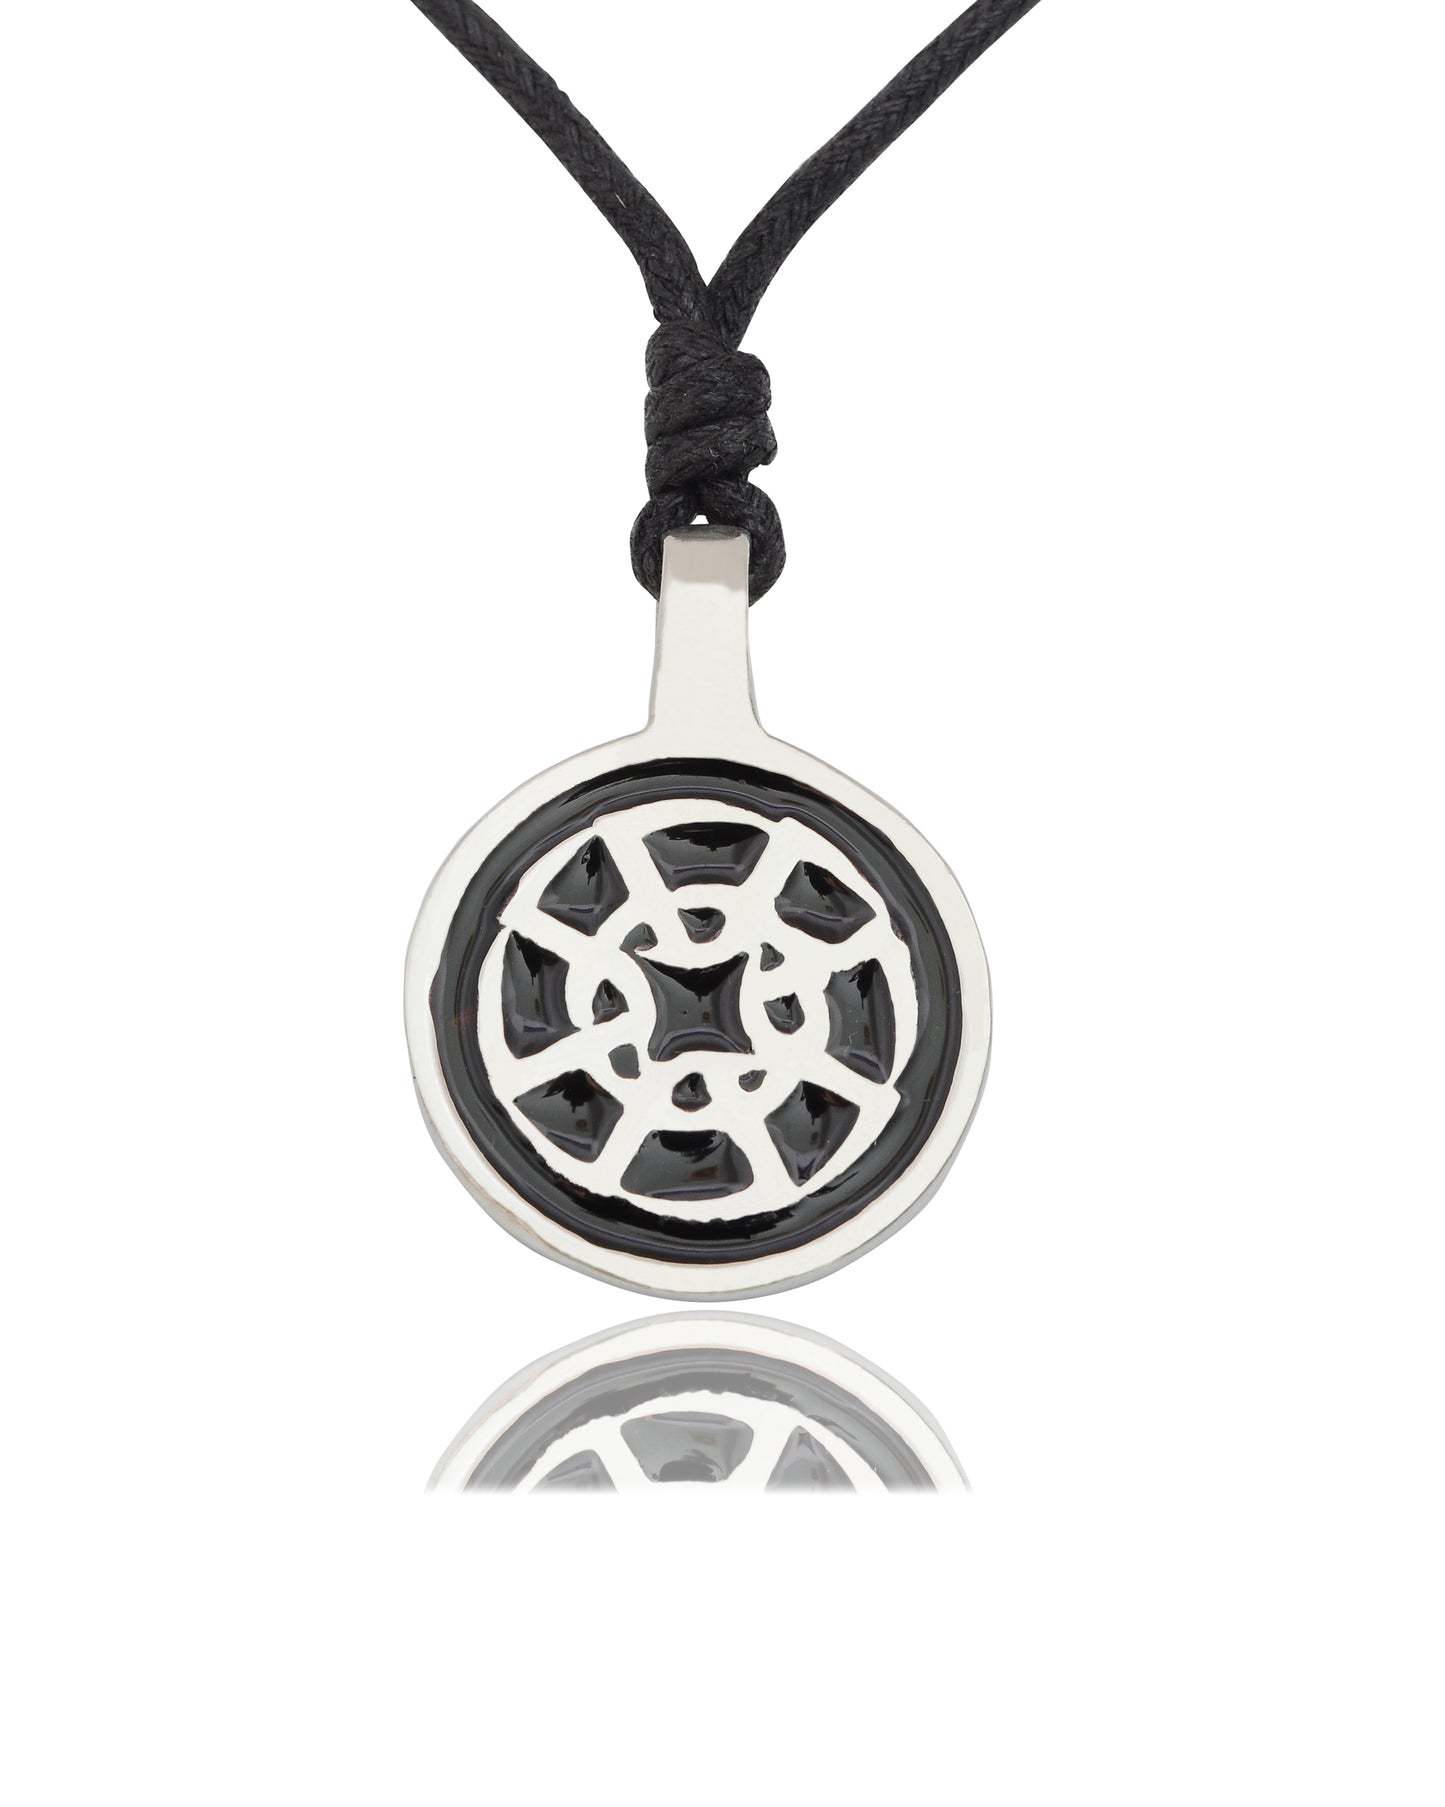 Colorful Buddhist Wheel of Life Silver Pewter Charm Necklace Pendant Jewelry